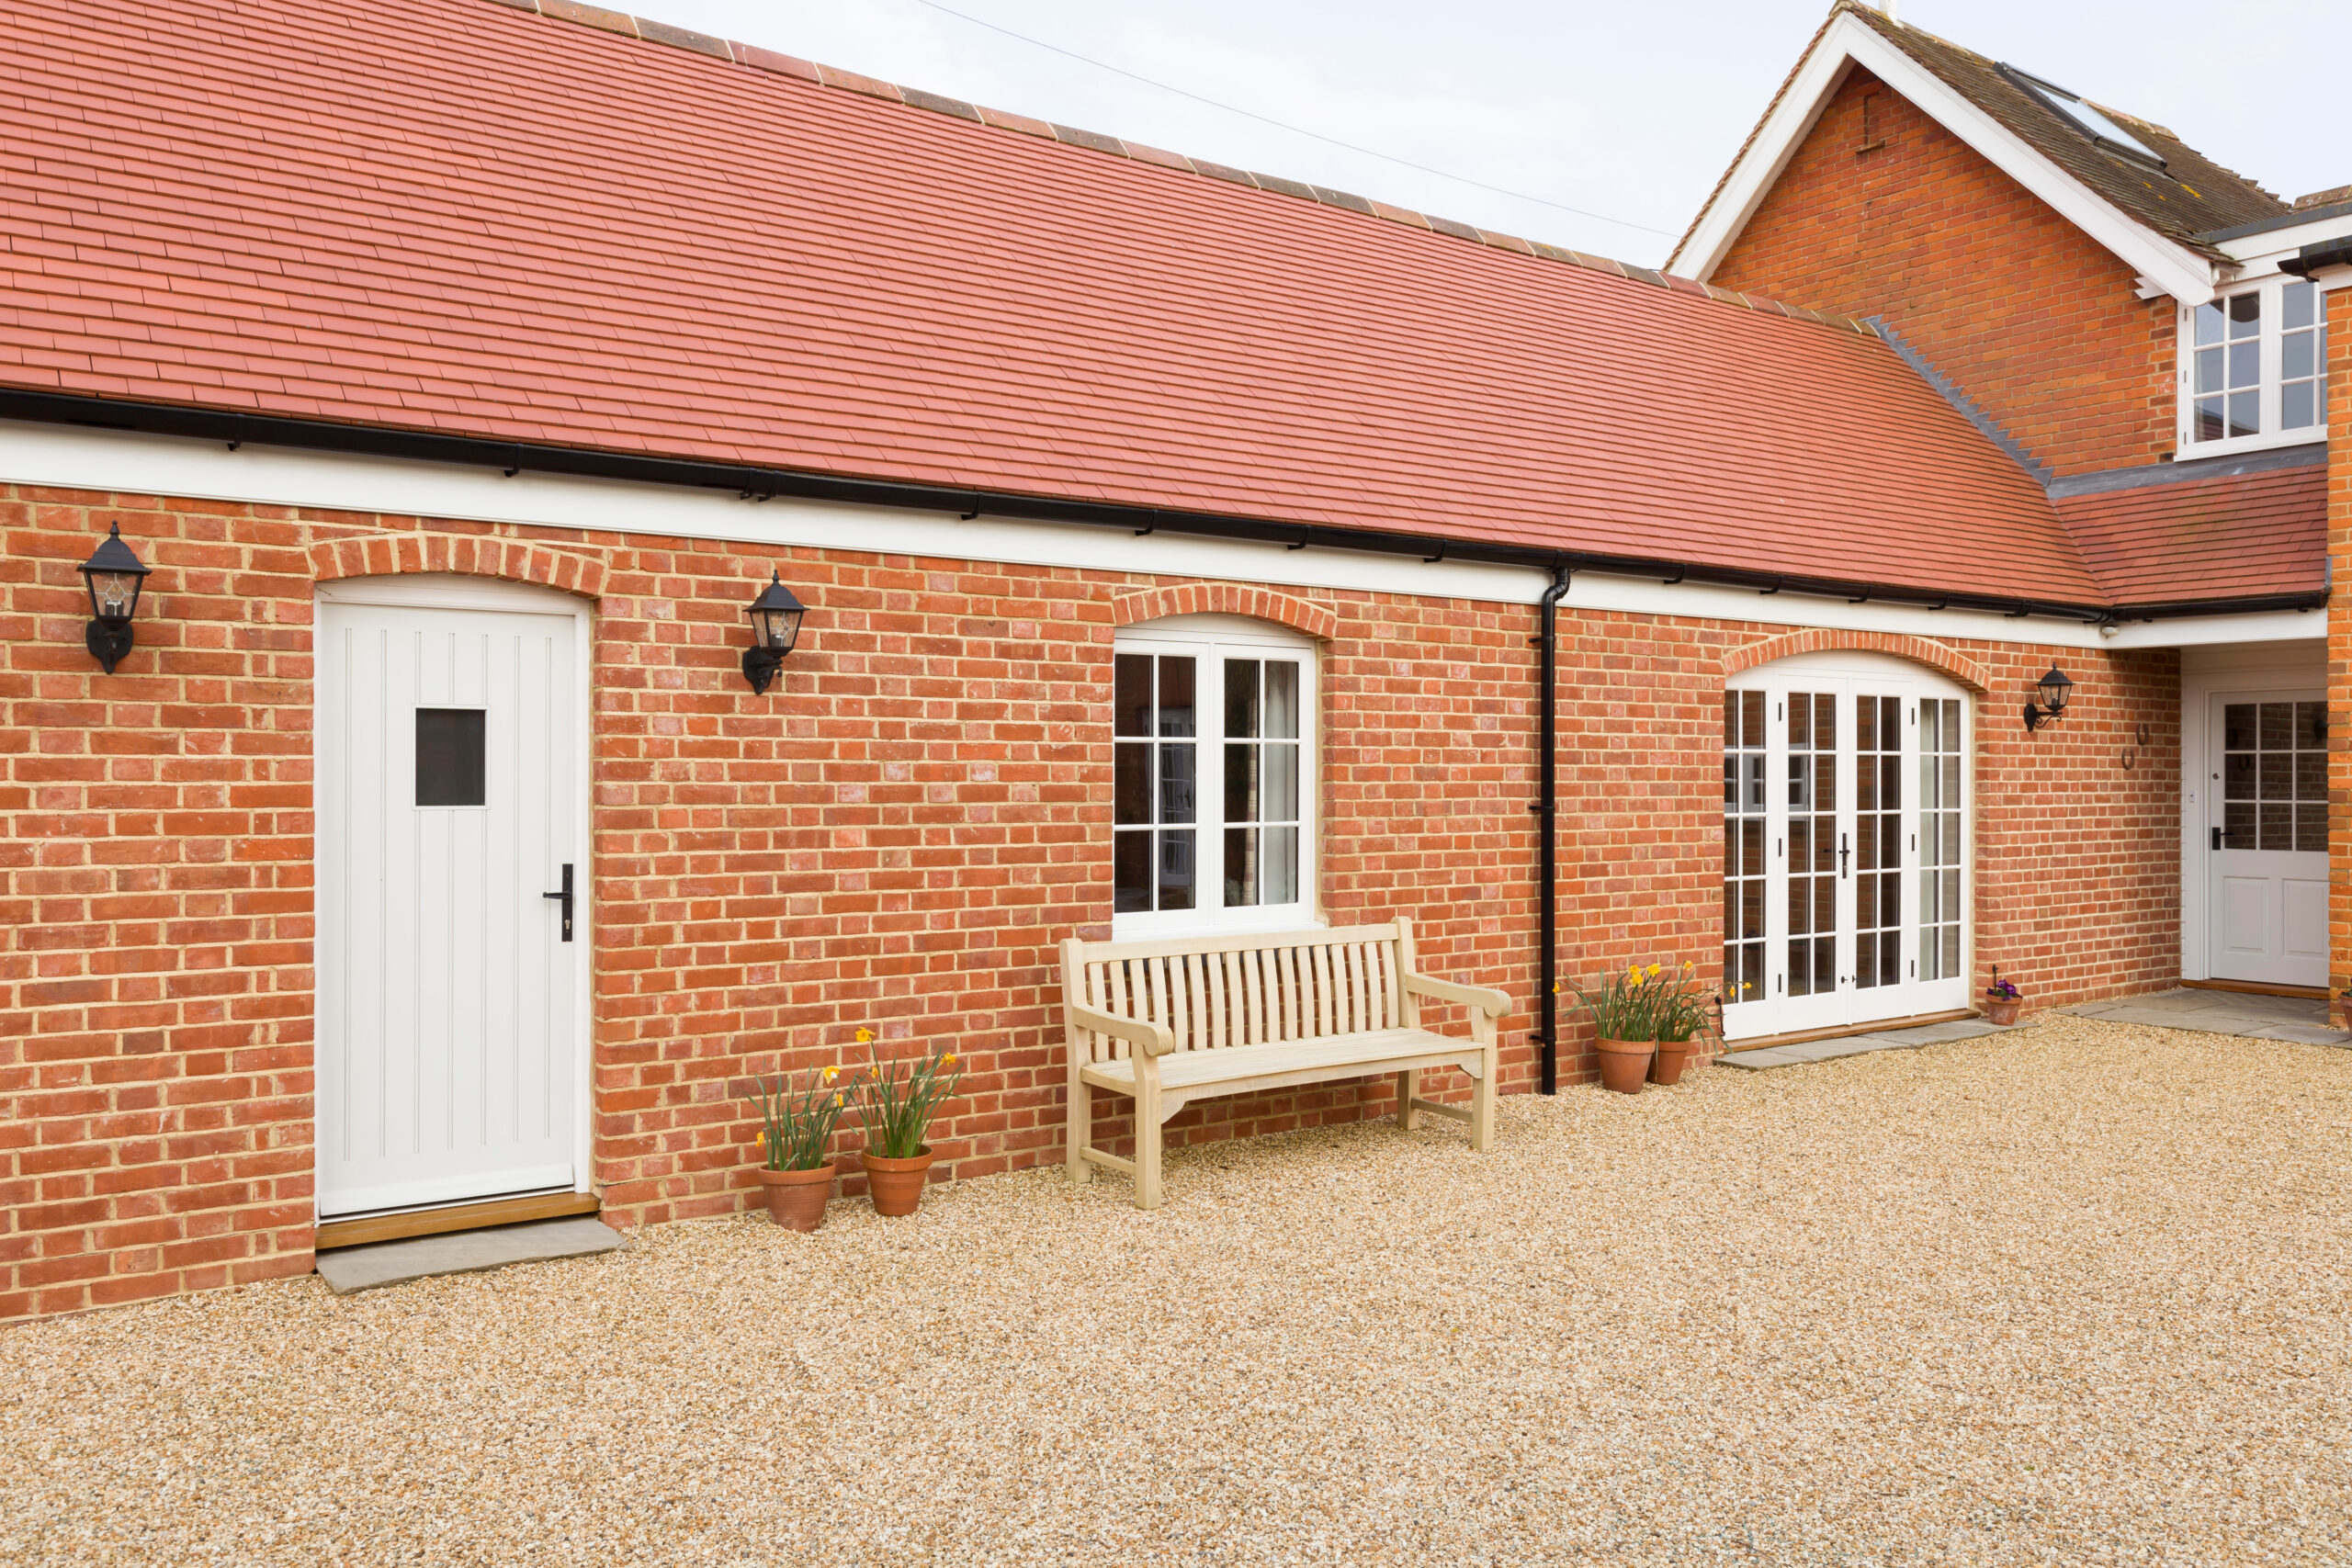 Do I Need Planning Permission for a Garage Conversion?